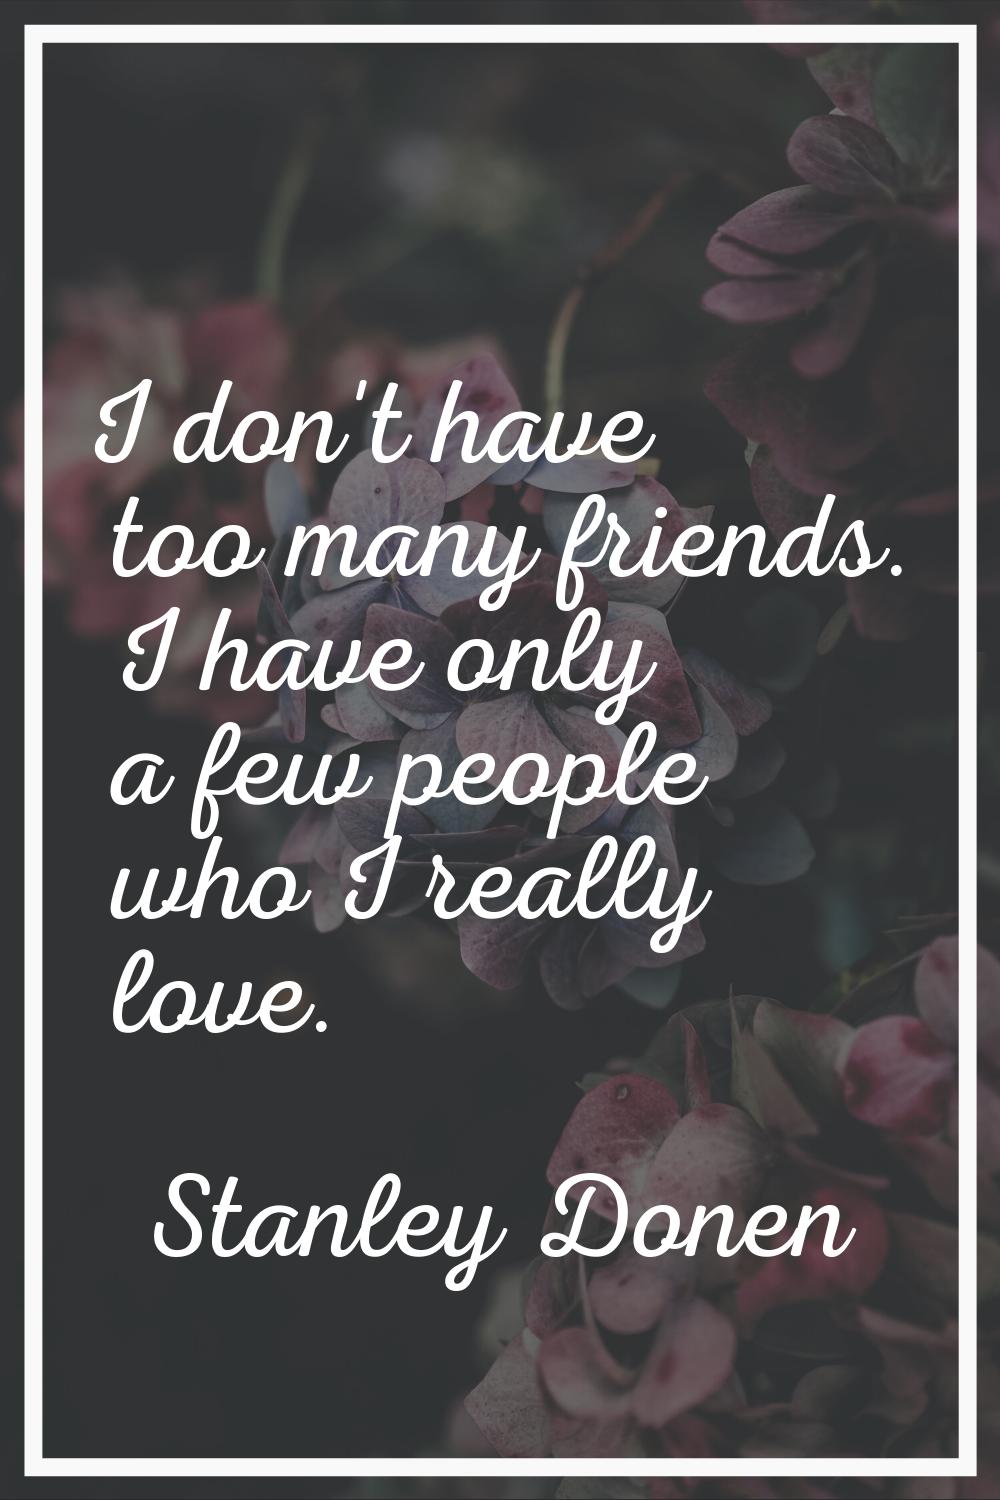 I don't have too many friends. I have only a few people who I really love.